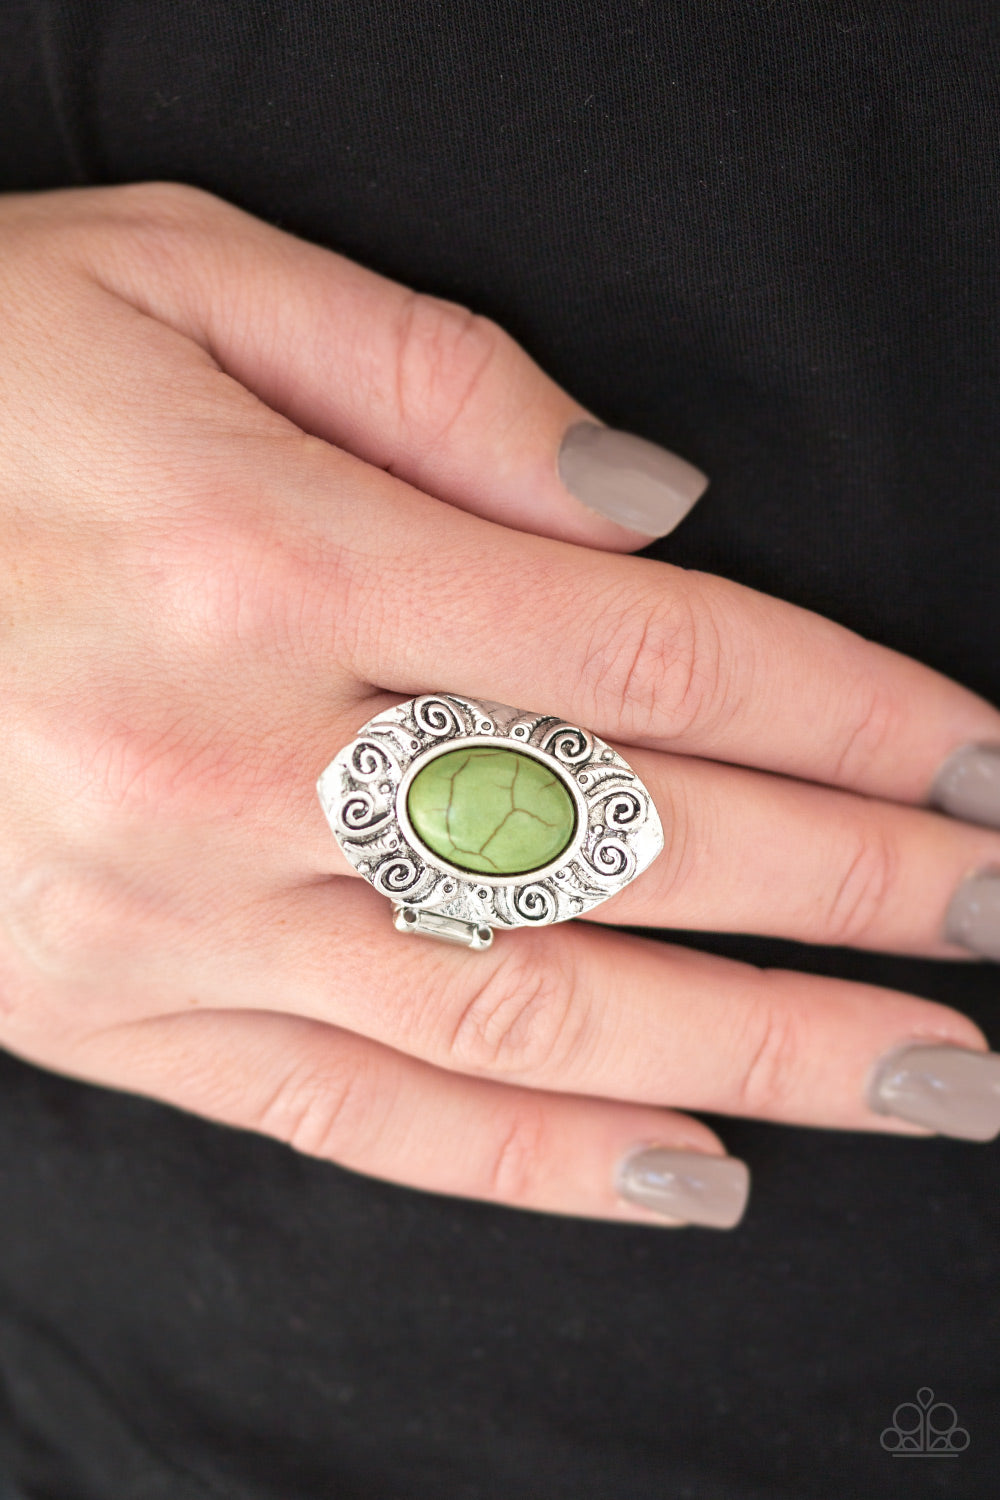 silver, silver jewelry, green, crackle stone, stone jewelry, paparazzi accessories, affordable jewelry, everyday jewelry, ring, adjustable ring, st pattys day 